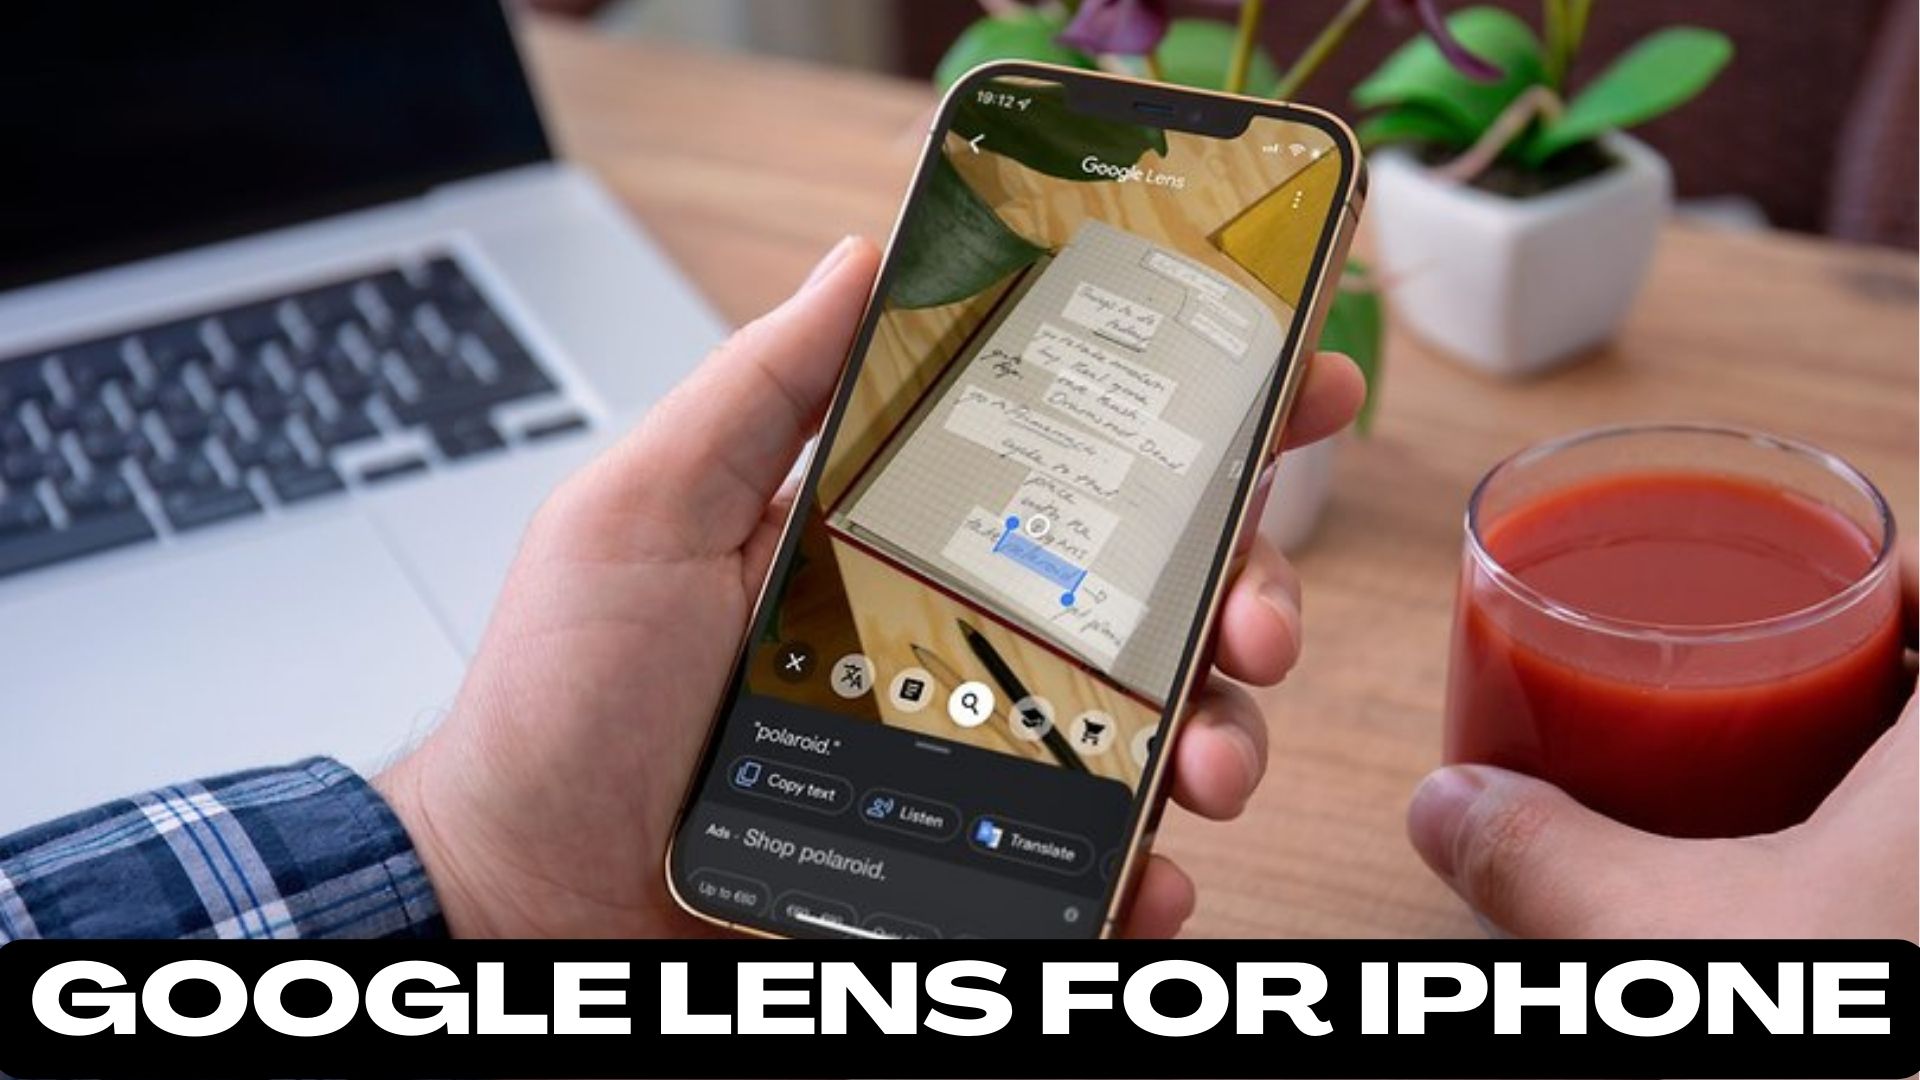 Google Lens For IPhone - Revolutionizing Search